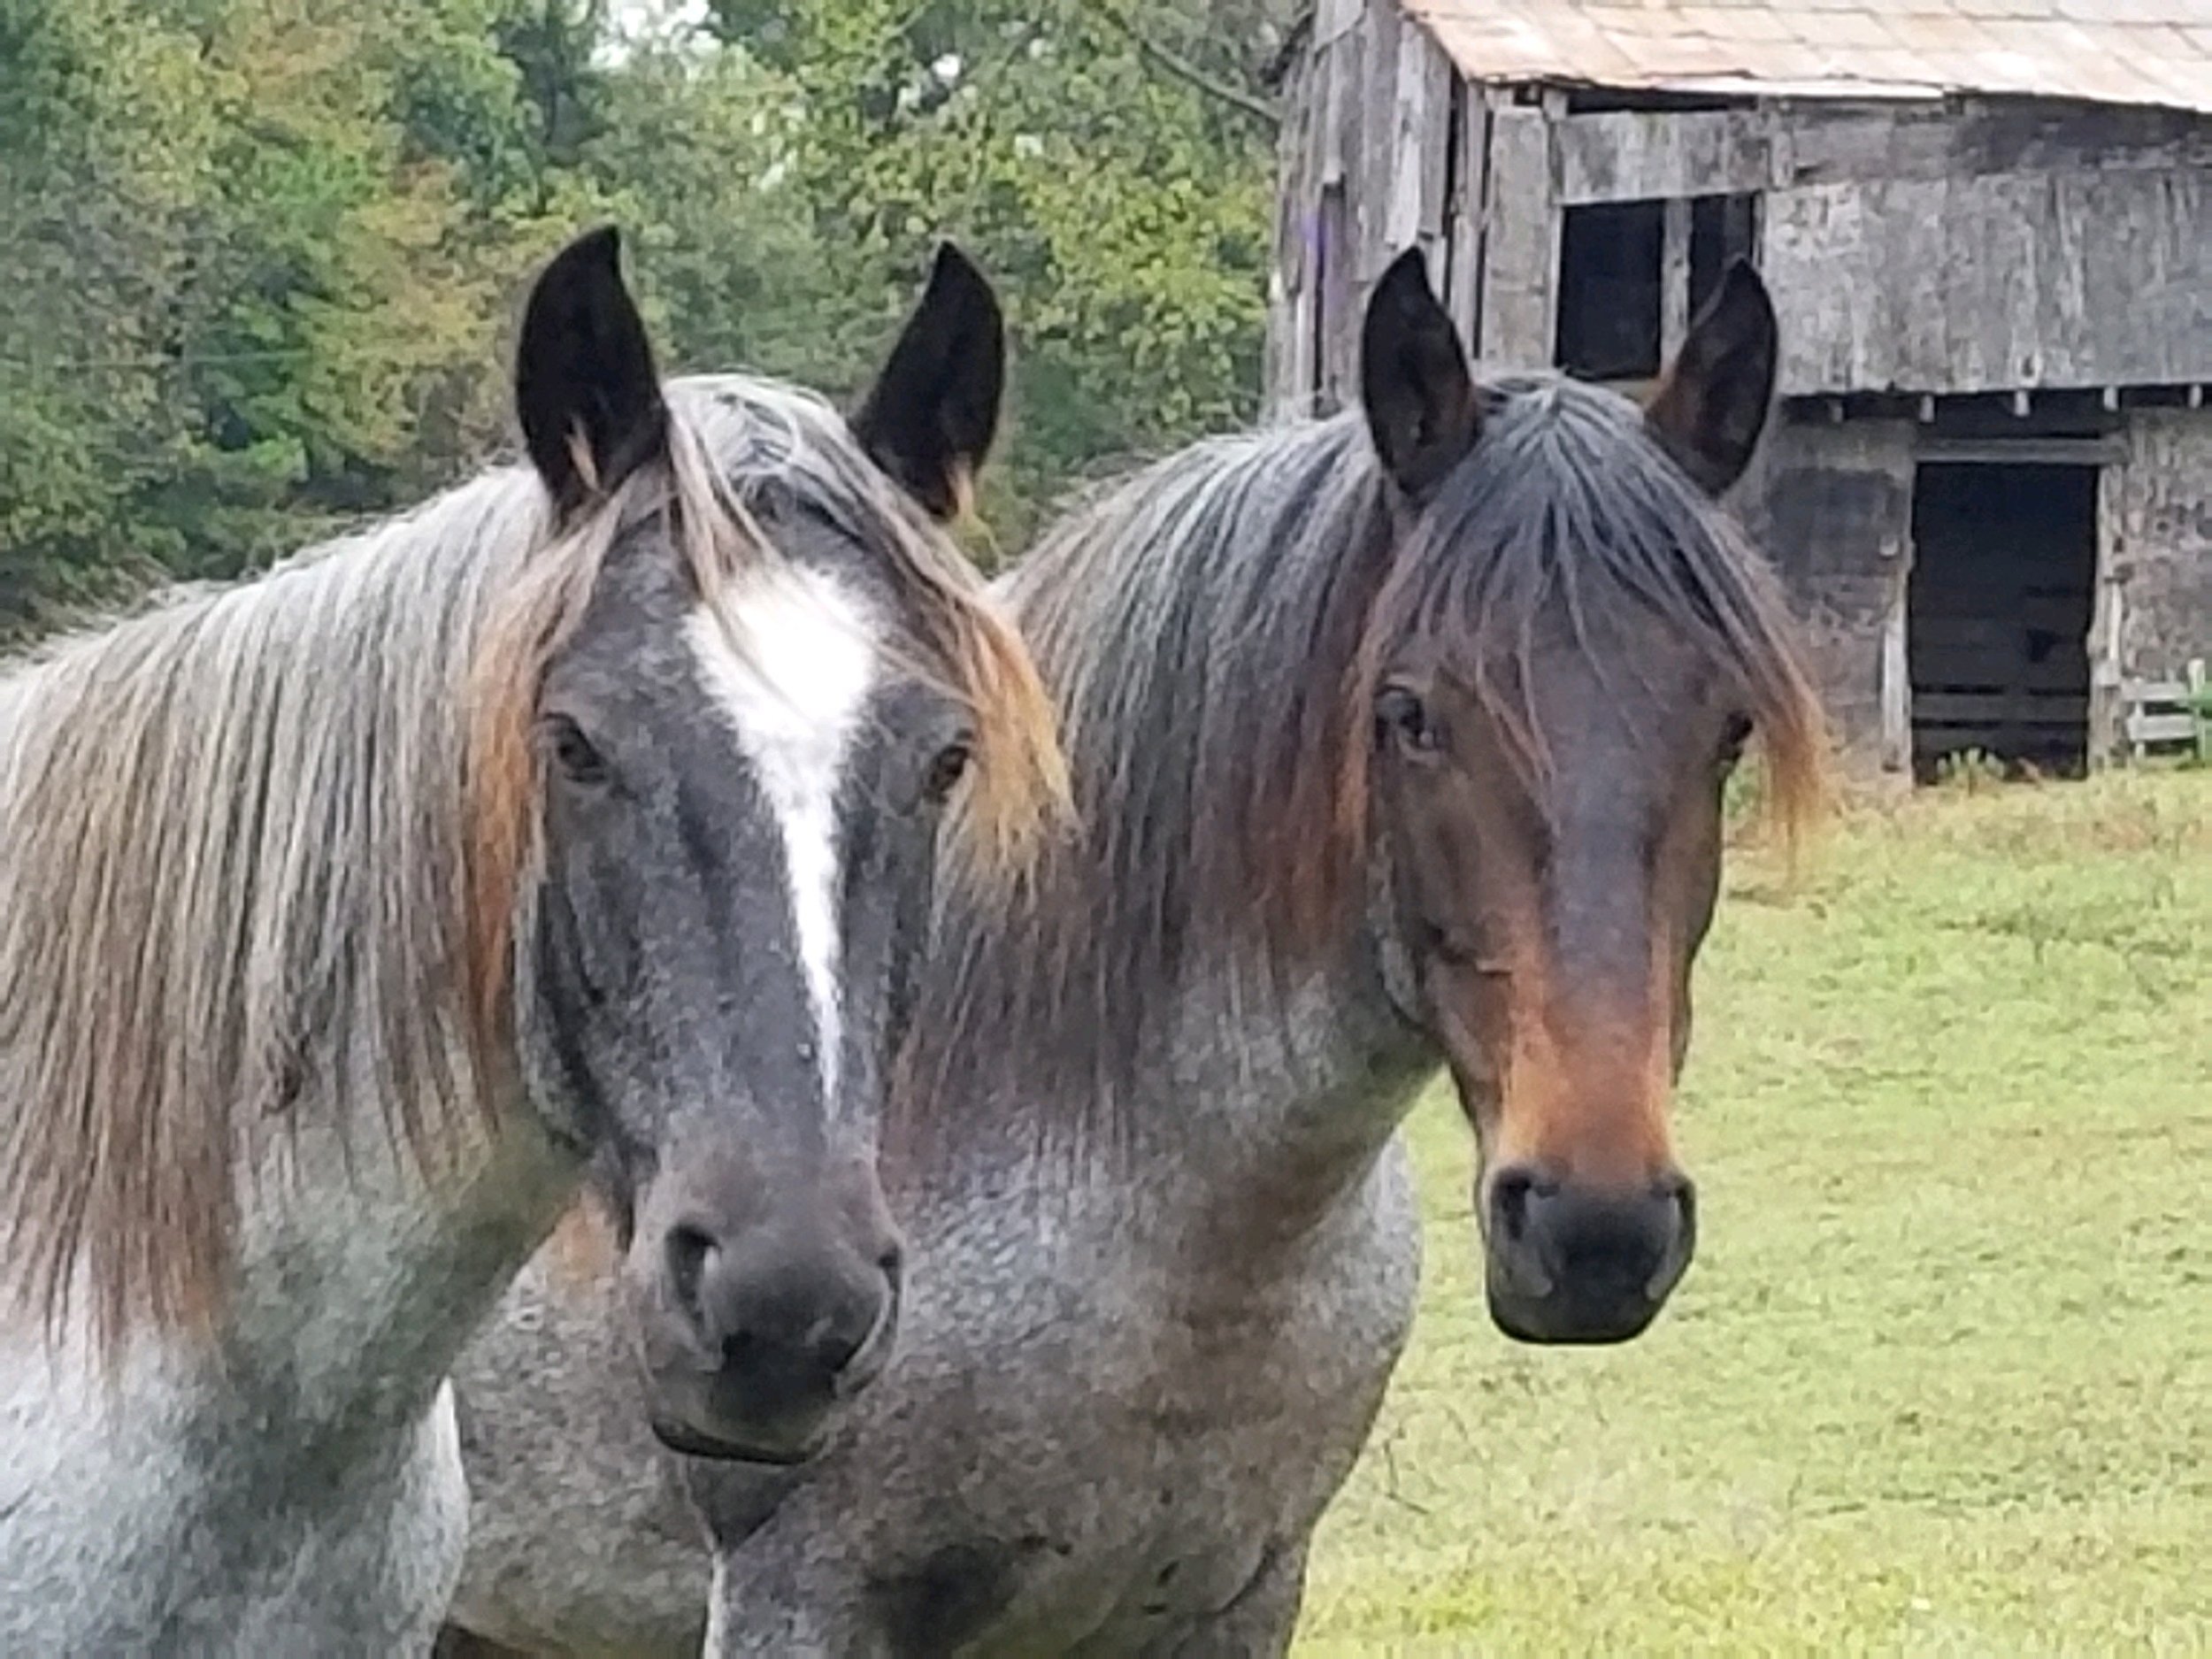 River (left) with her friend Lady Jane